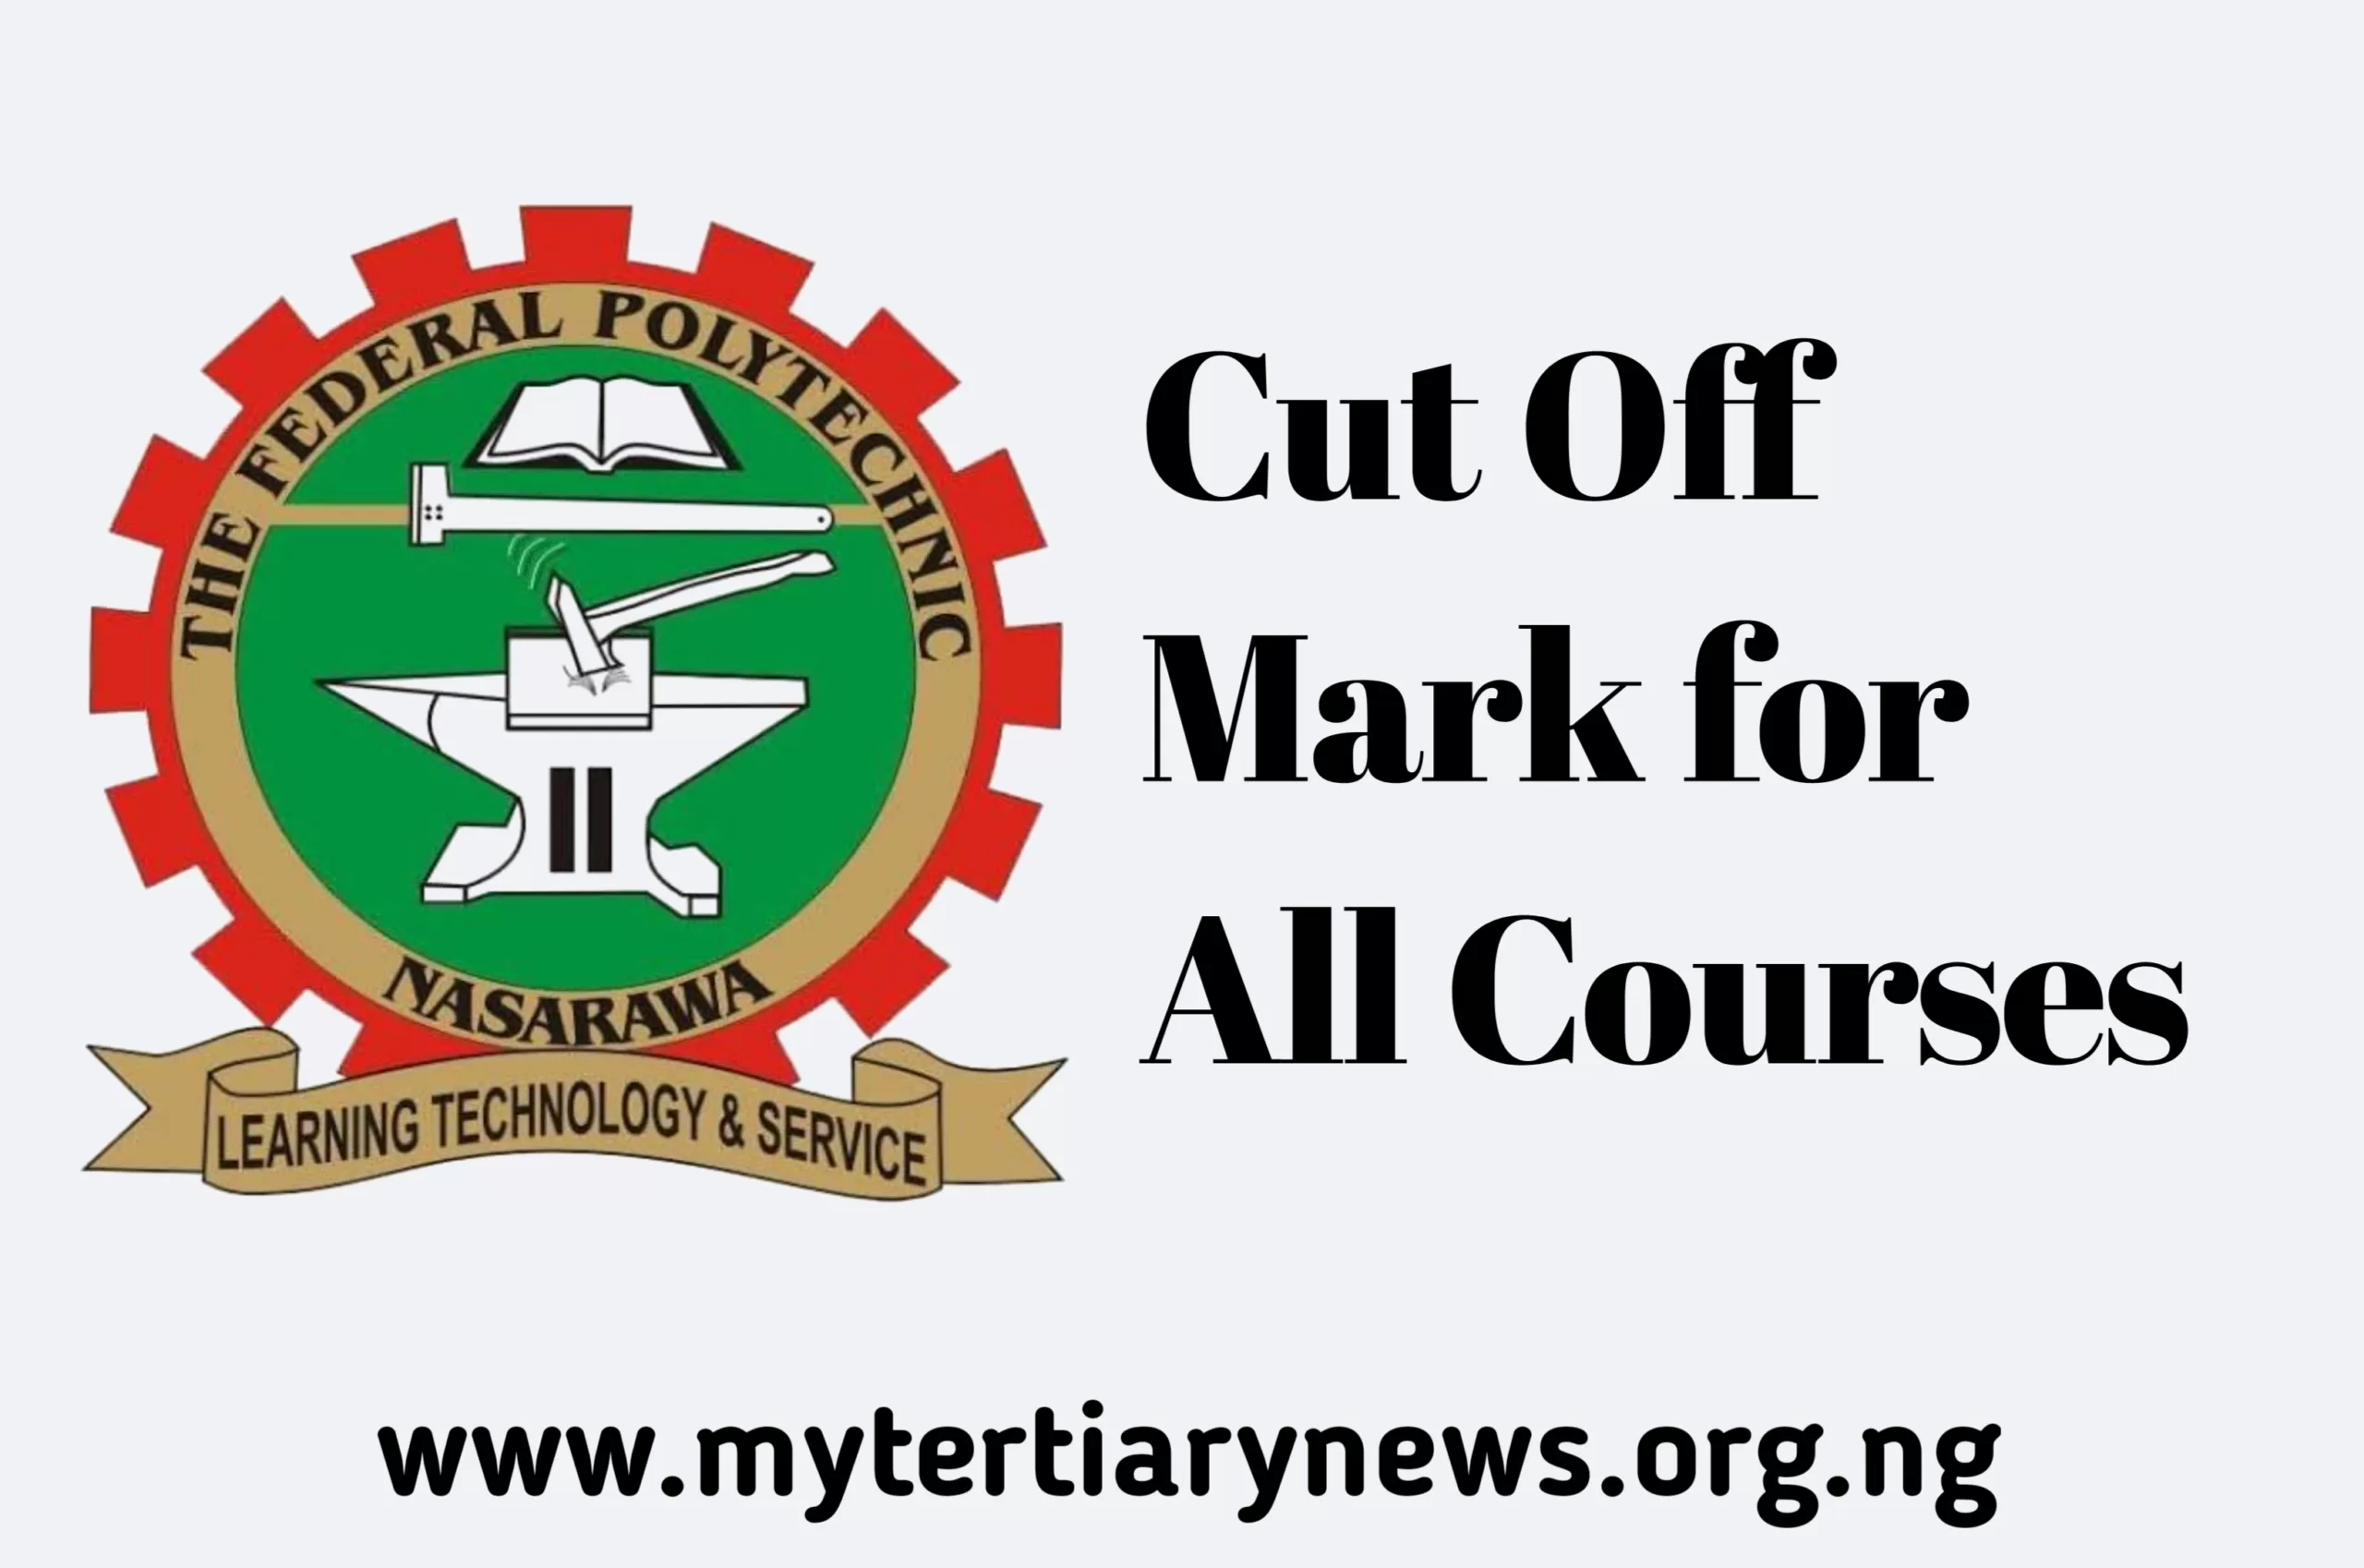 Federal Polytechnic Nasarawa Image || Federal Polytechnic Nasarawa Cut Off Mark for All Courses